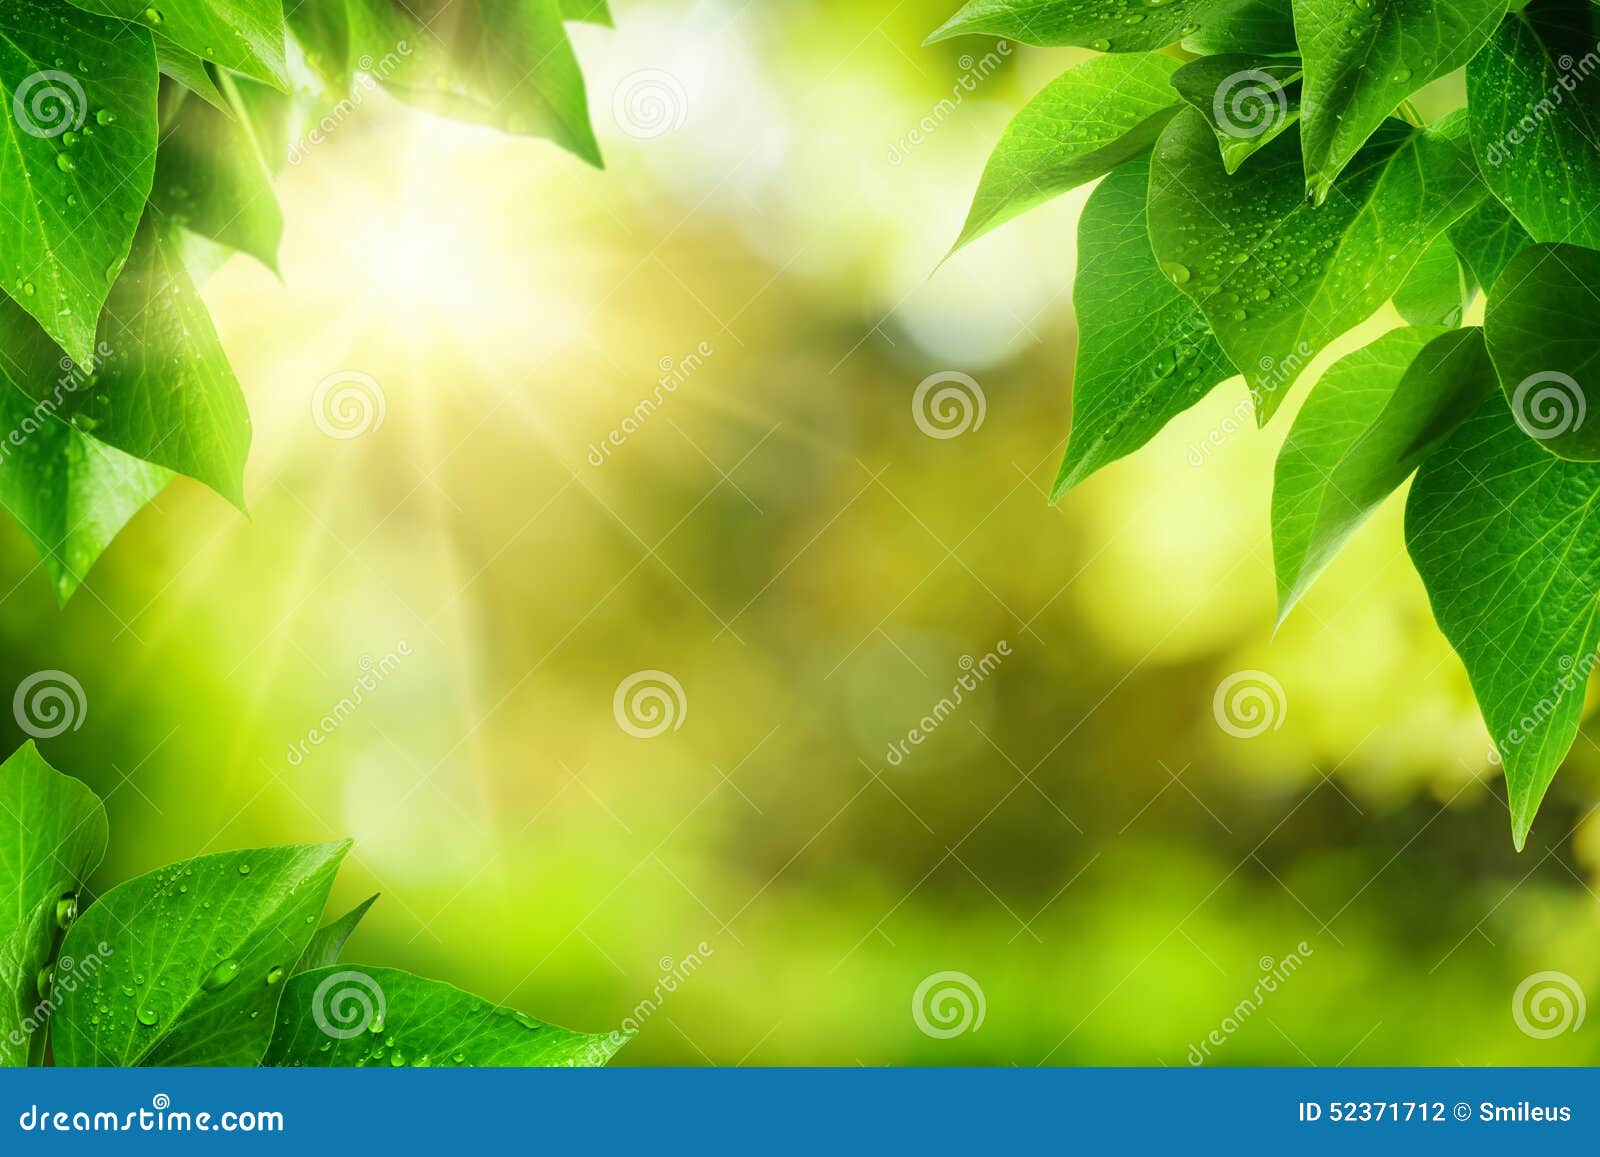 nature background framed by green leaves